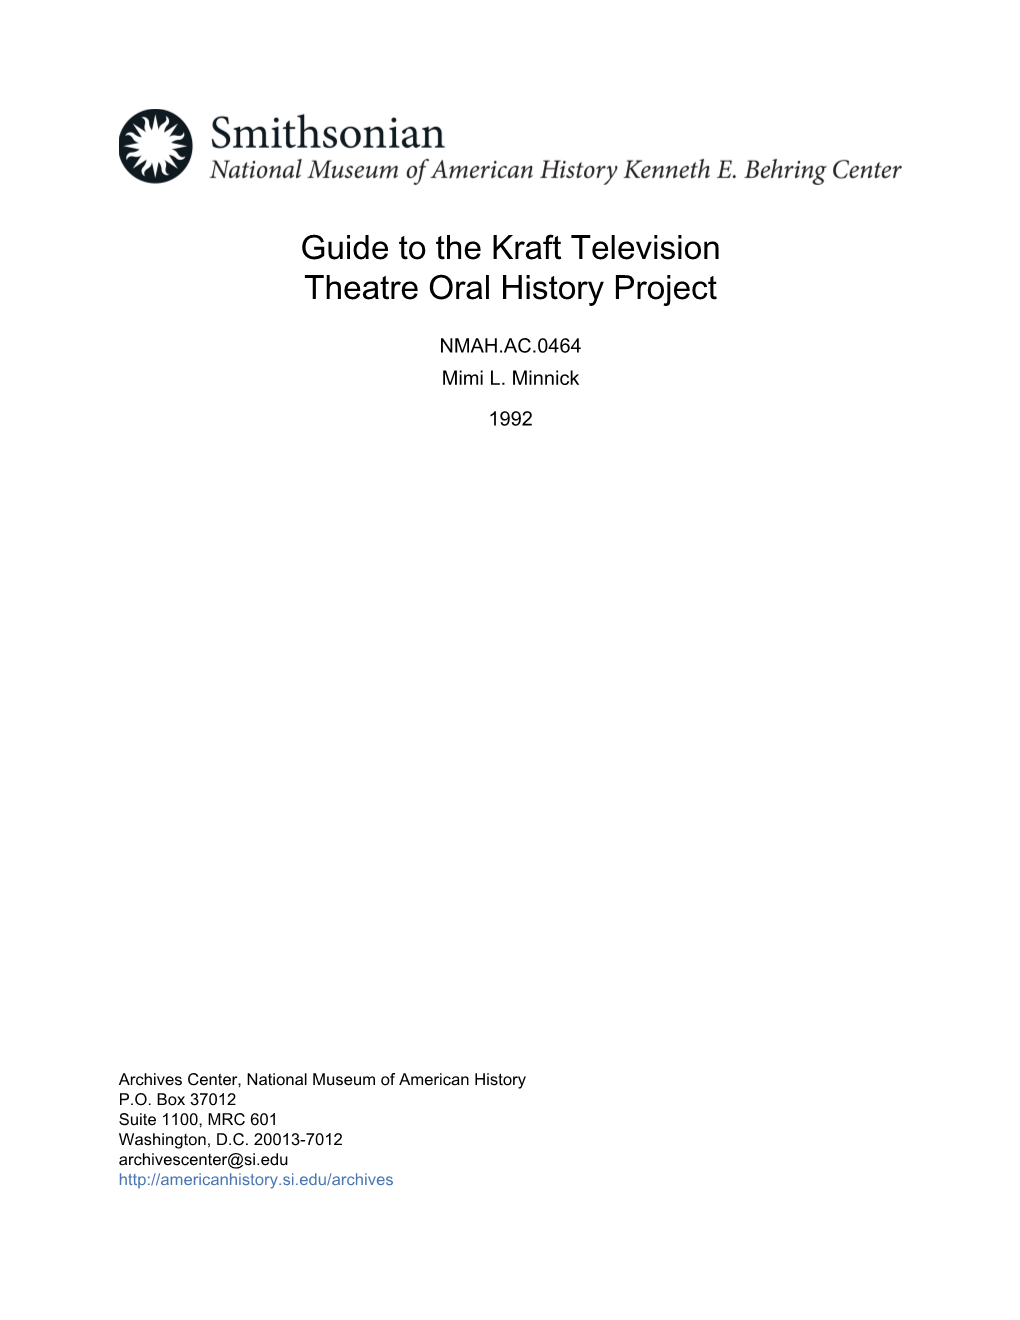 Guide to the Kraft Television Theatre Oral History Project